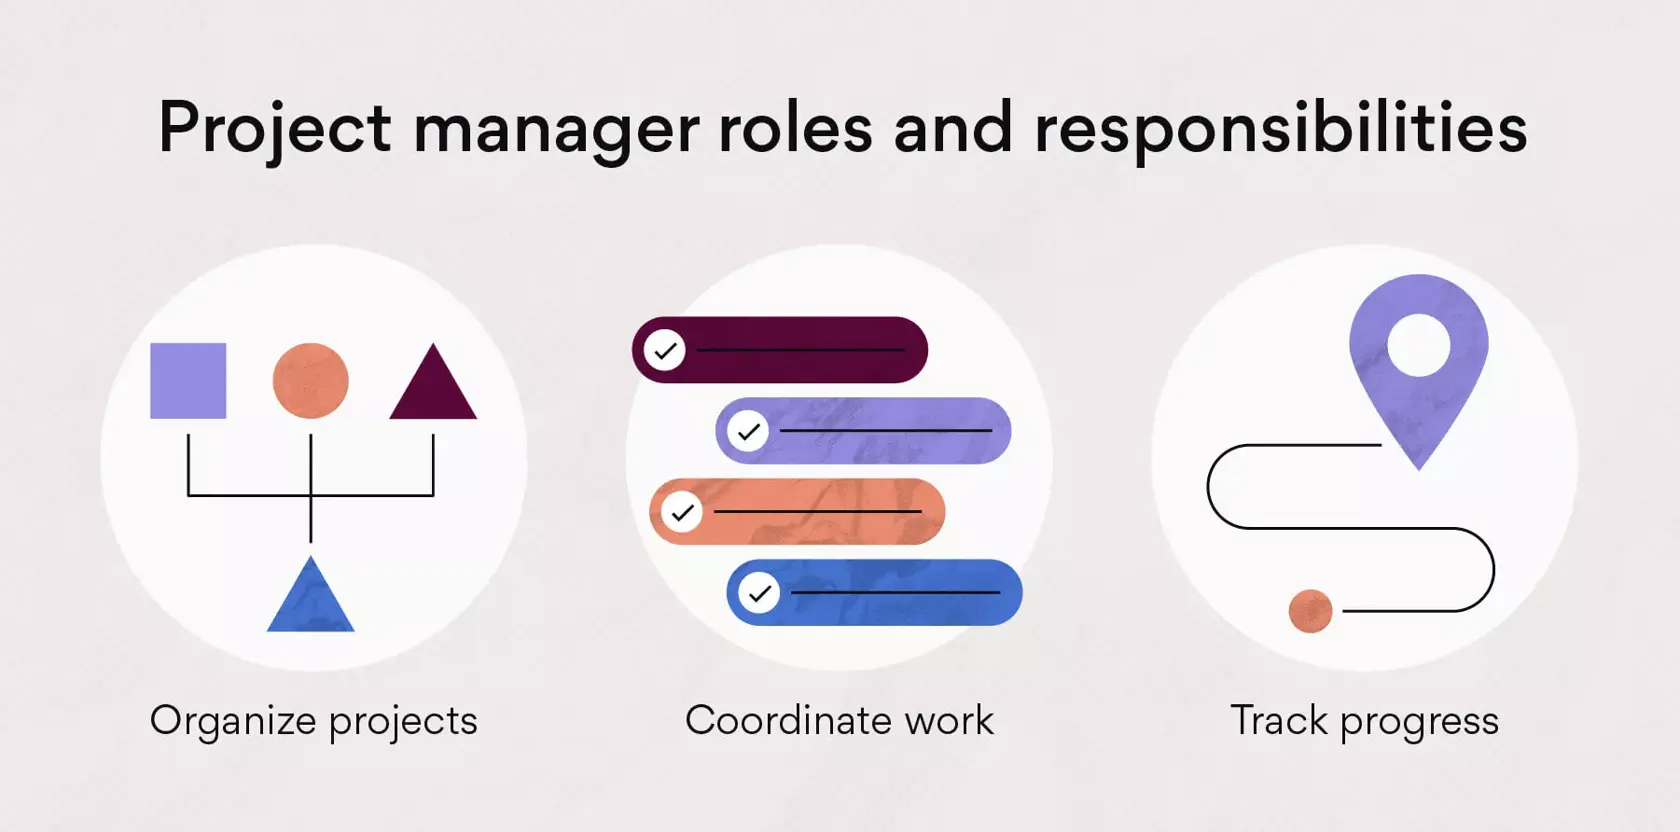 Project manager roles and responsibilities